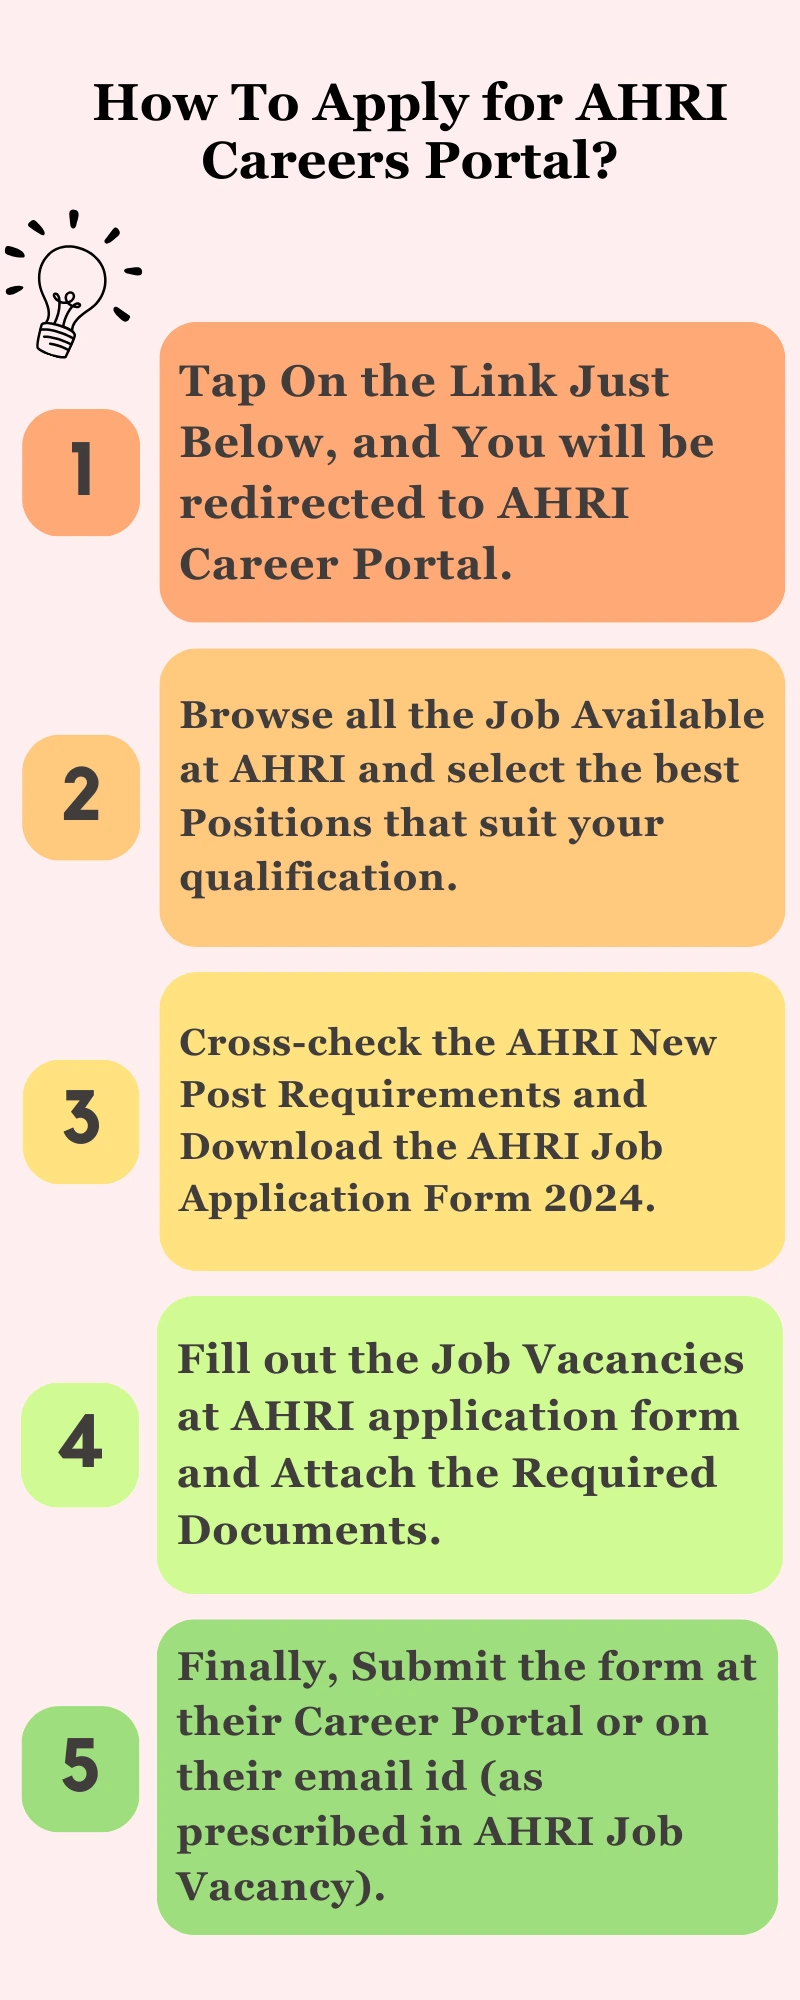 How To Apply for AHRI Careers Portal?